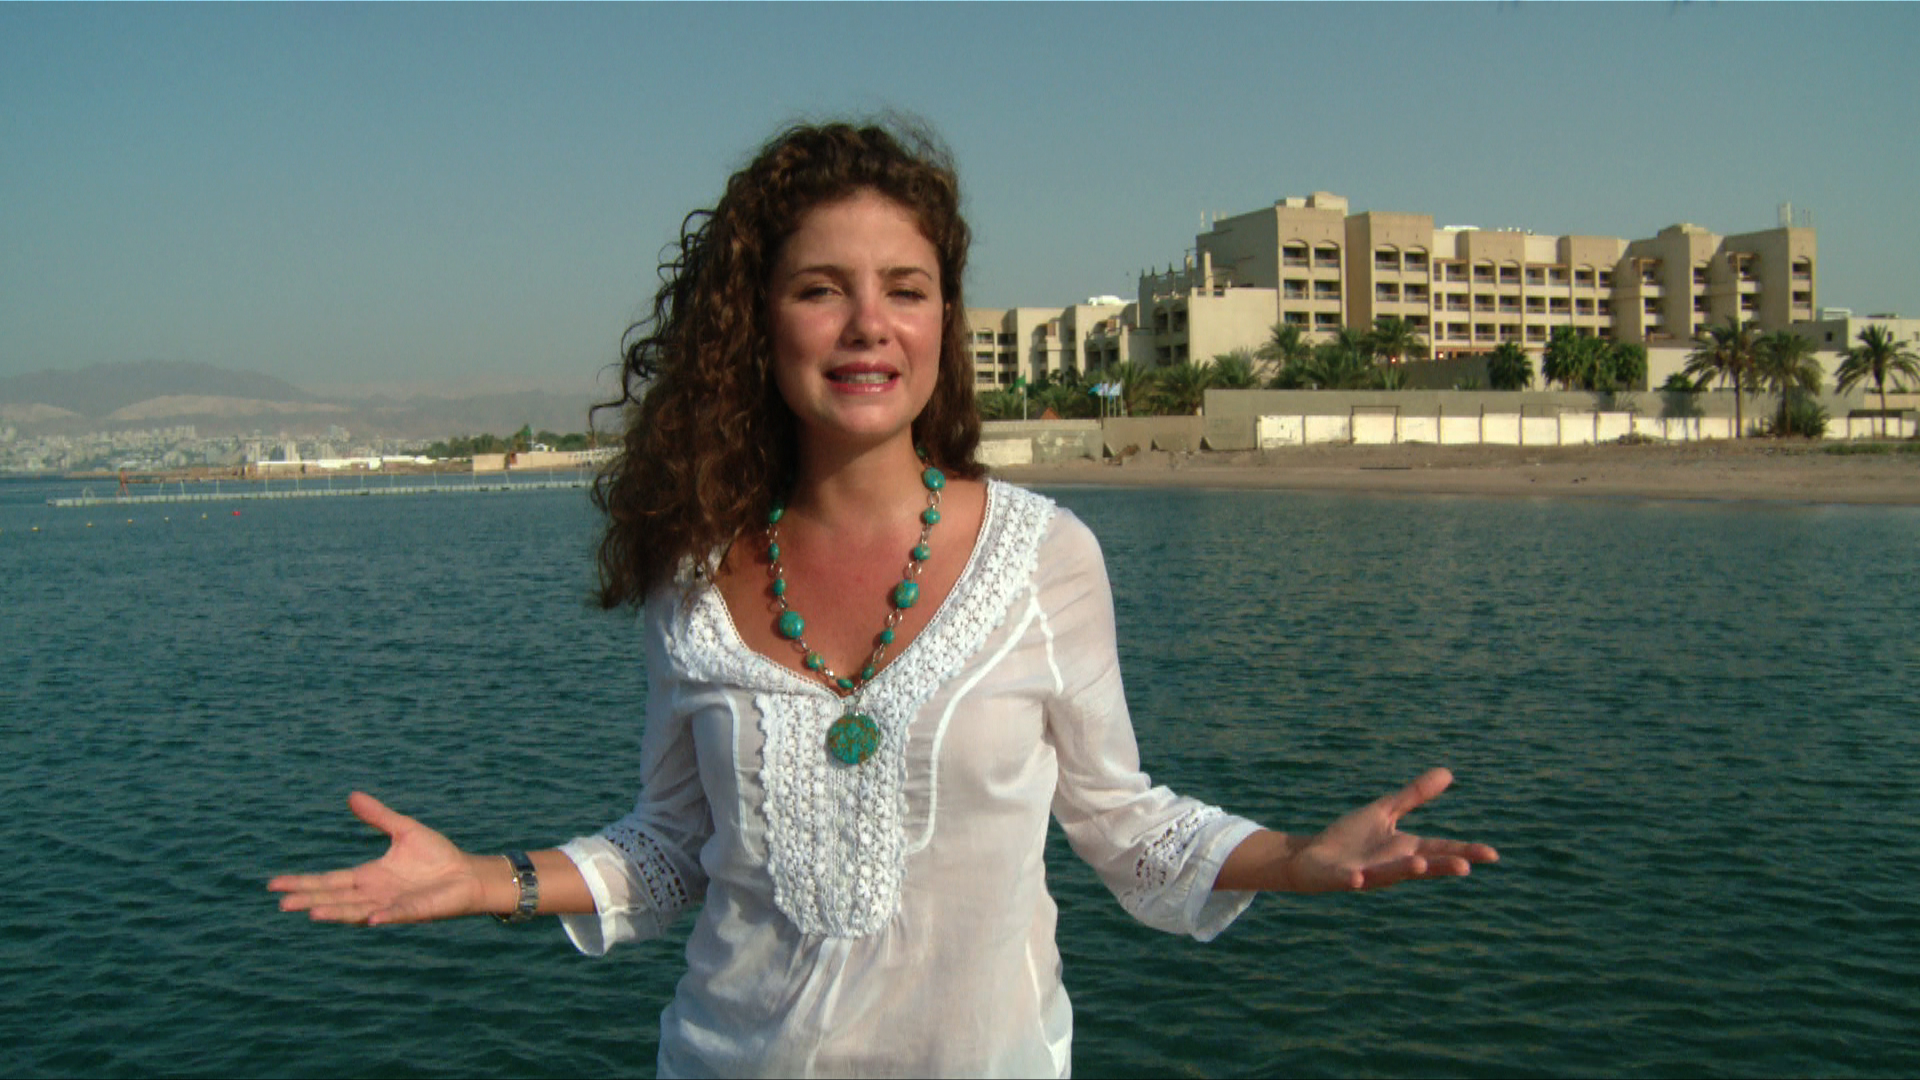 Rima Maktabi on the shores of the Gulf of Aqaba. Jordan, Egypt, Israel and Saudi Arabia all have borders here on the Northern Red Sea.